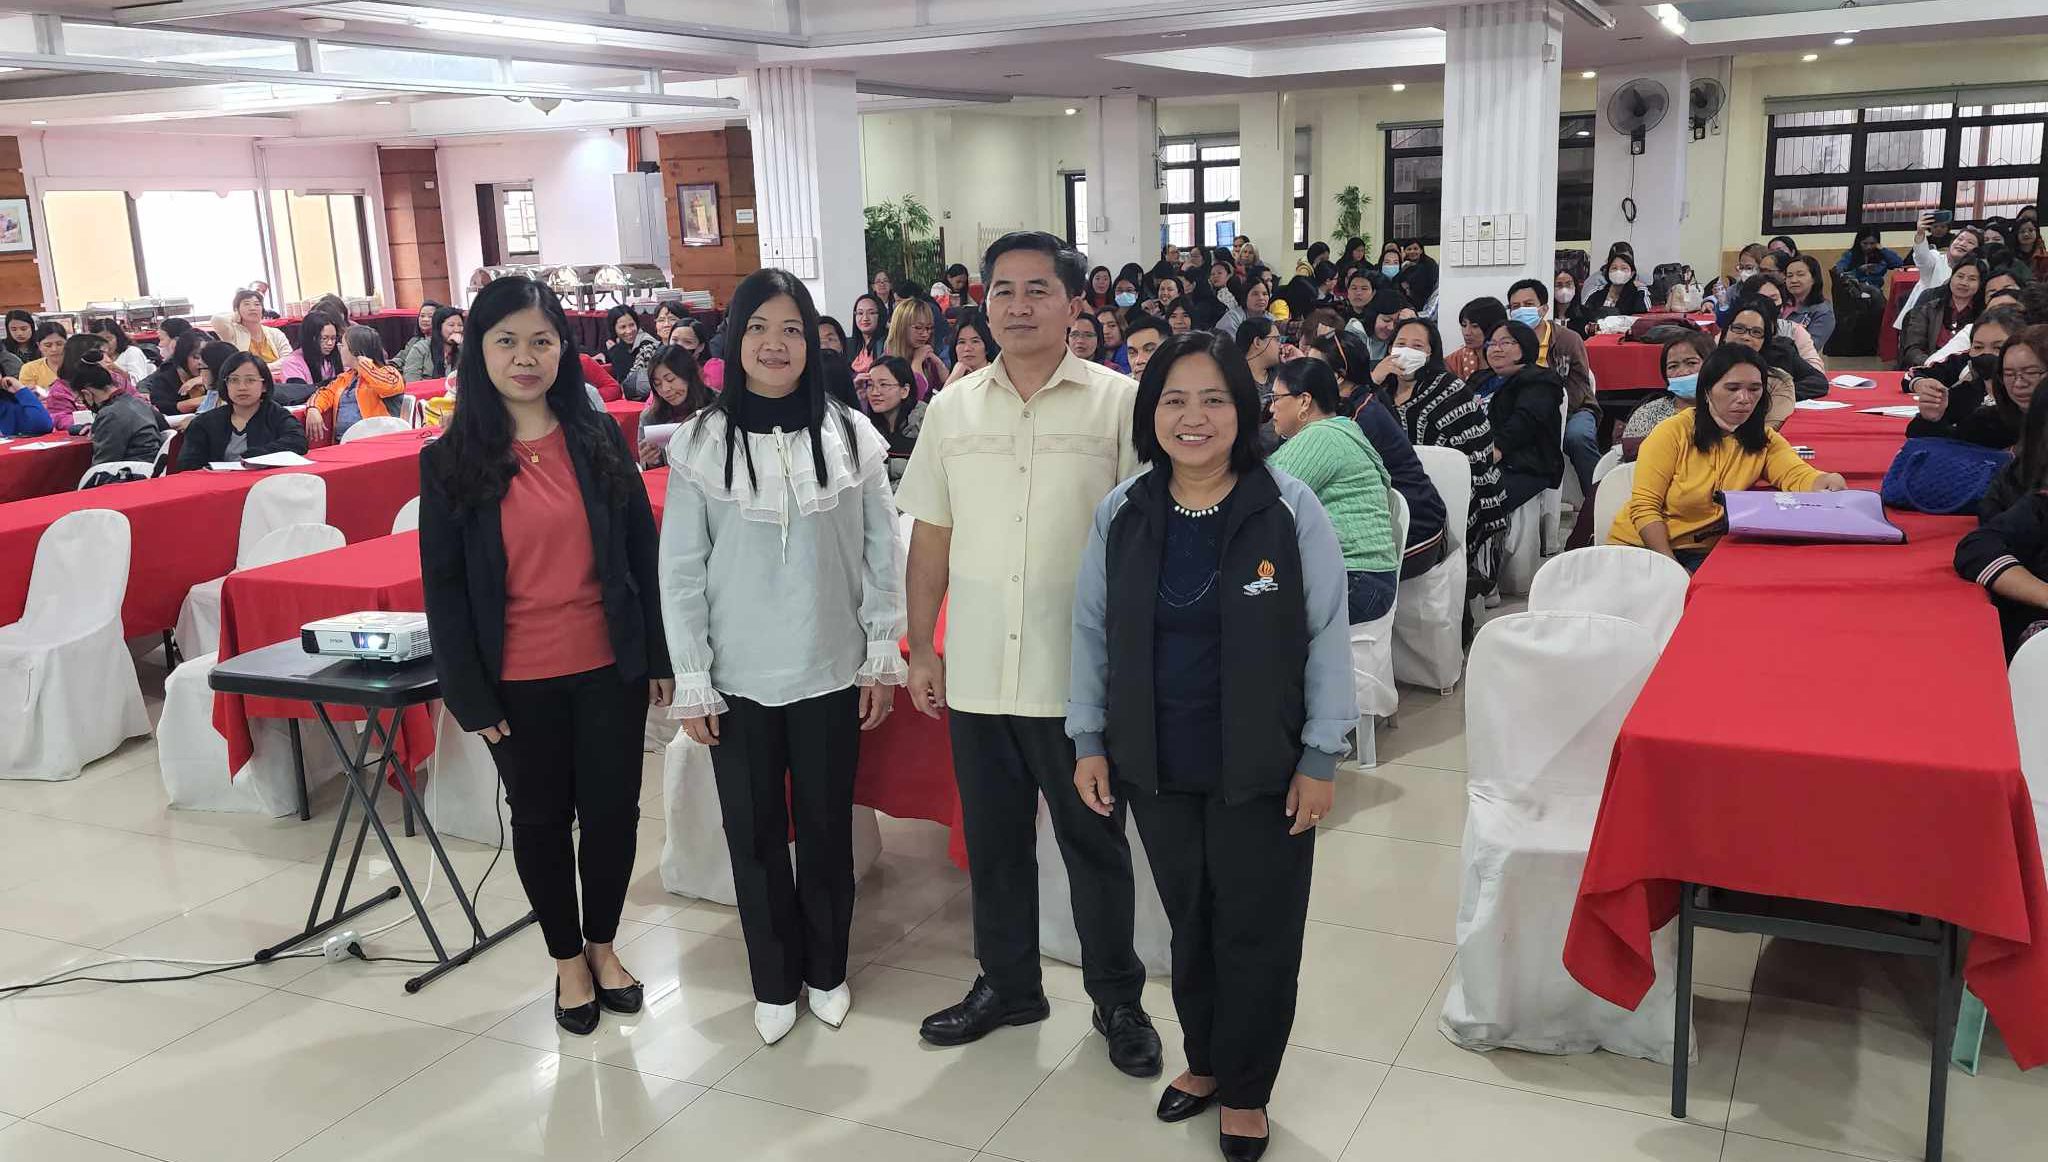 Schools Division of Benguet invites SLU Faculty as Resource Persons in Capability-Building Series